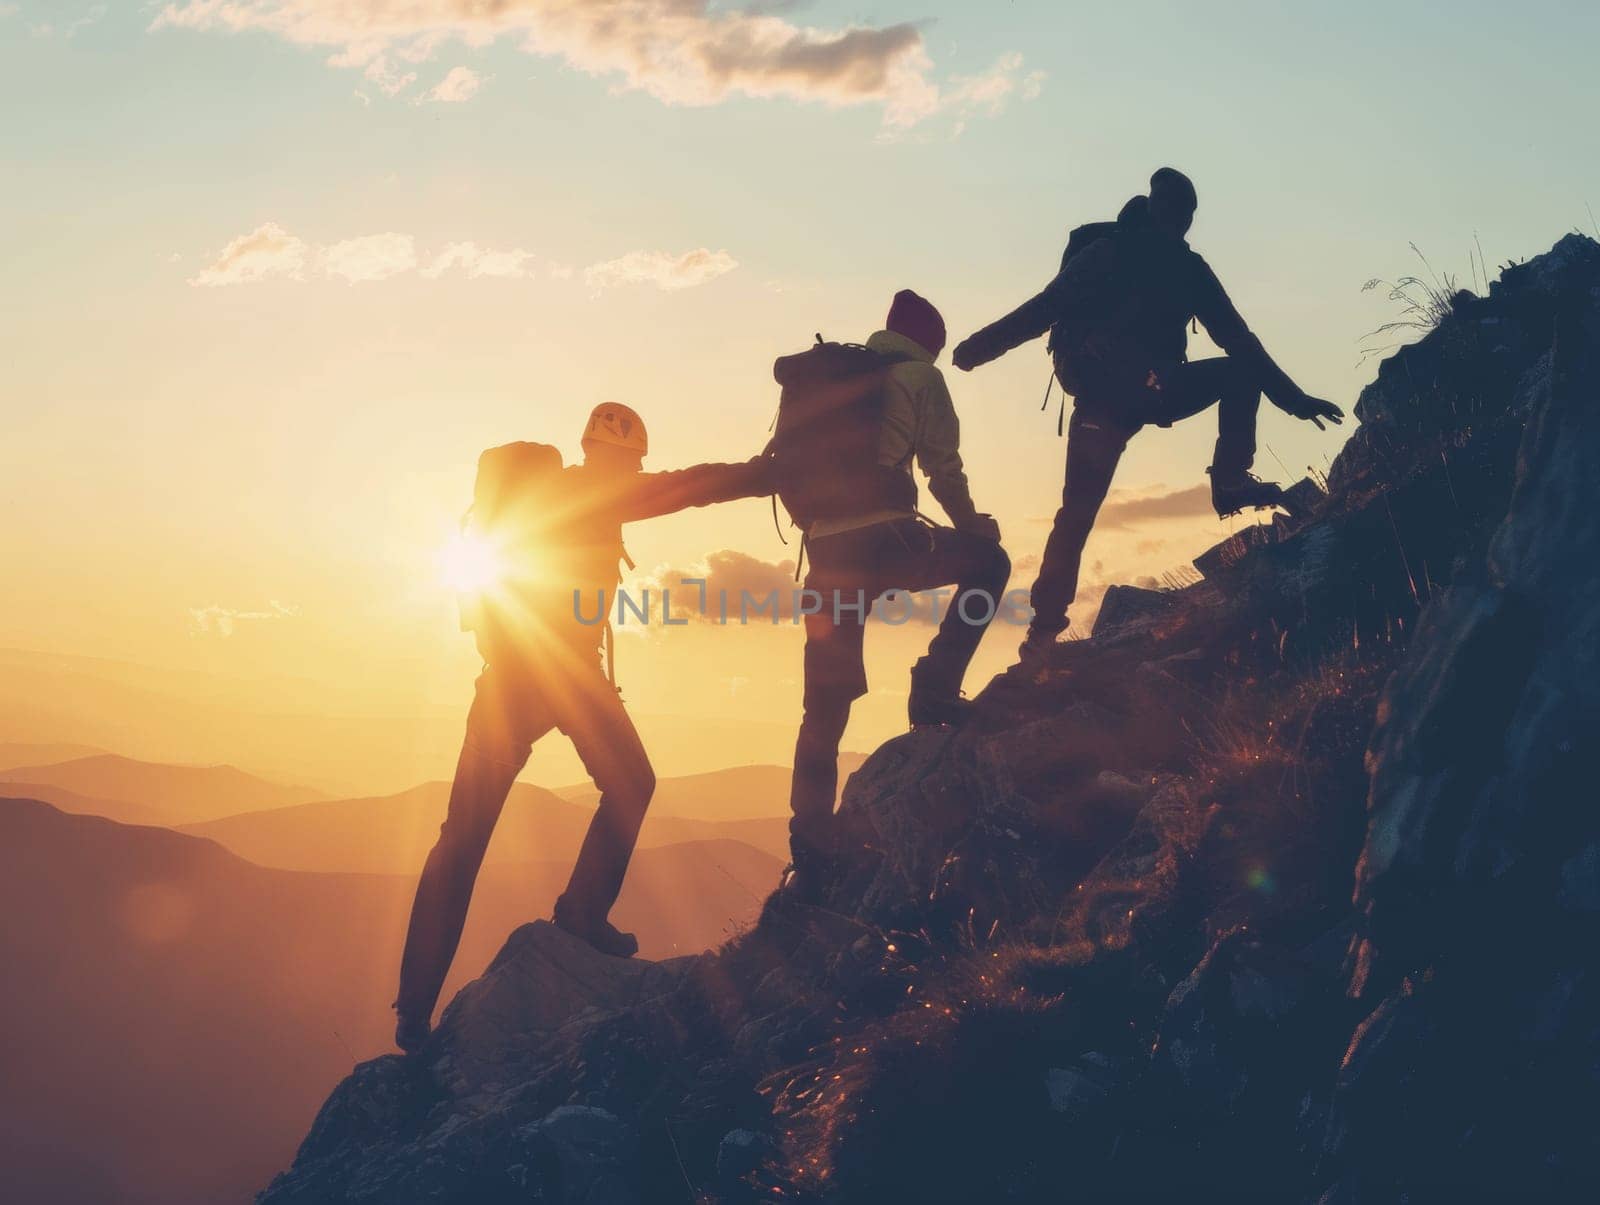 Silhouettes of friends climbing reach the mountain peak as a team at sunset.